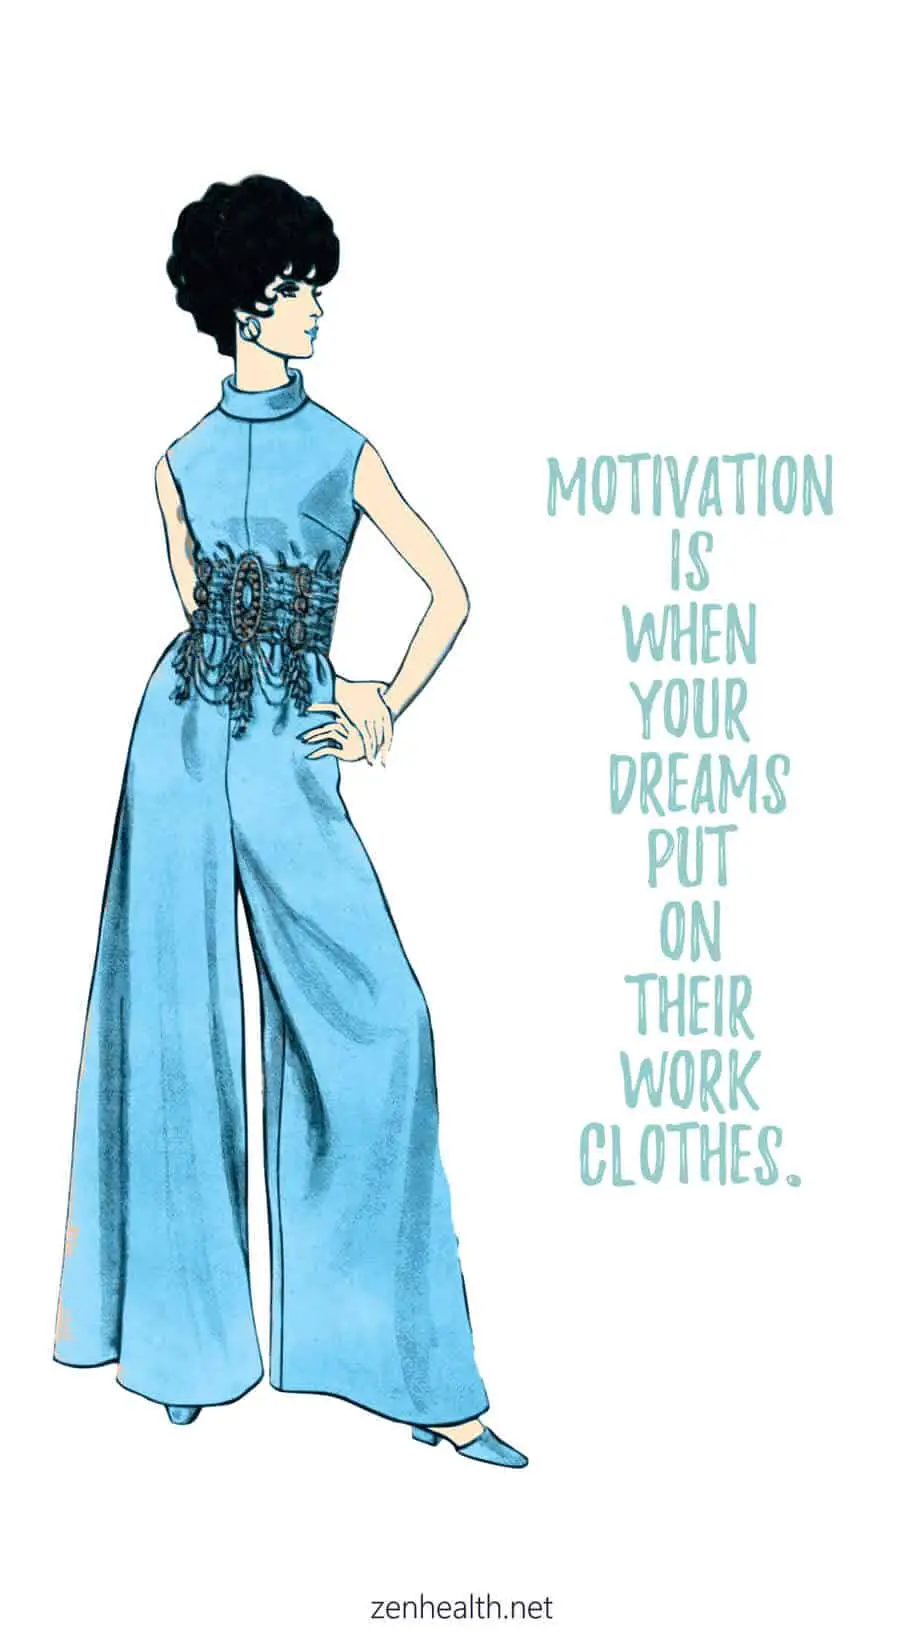 Motivation is when your dreams put on their work clothes.